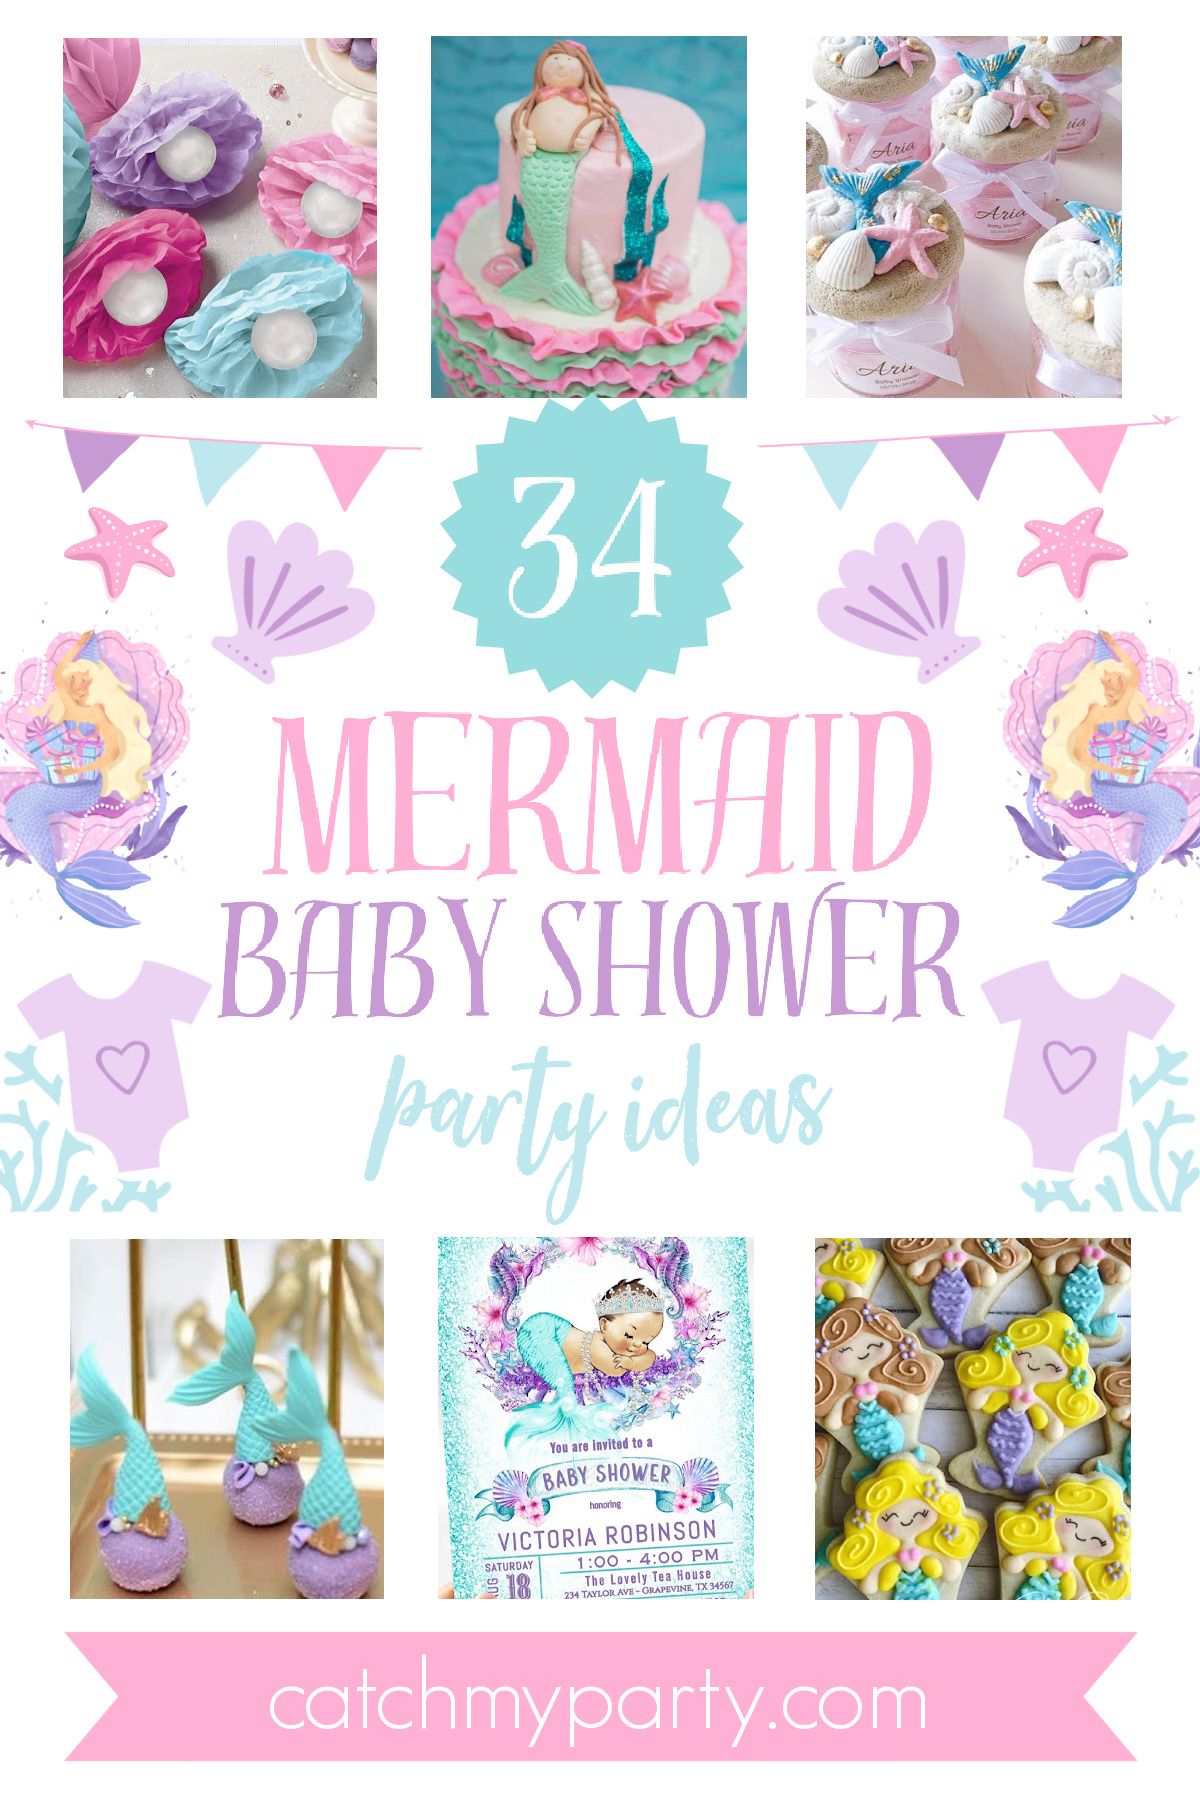 The Most Amazing 34 Mermaid Baby Shower Ideas and Party Supplies!